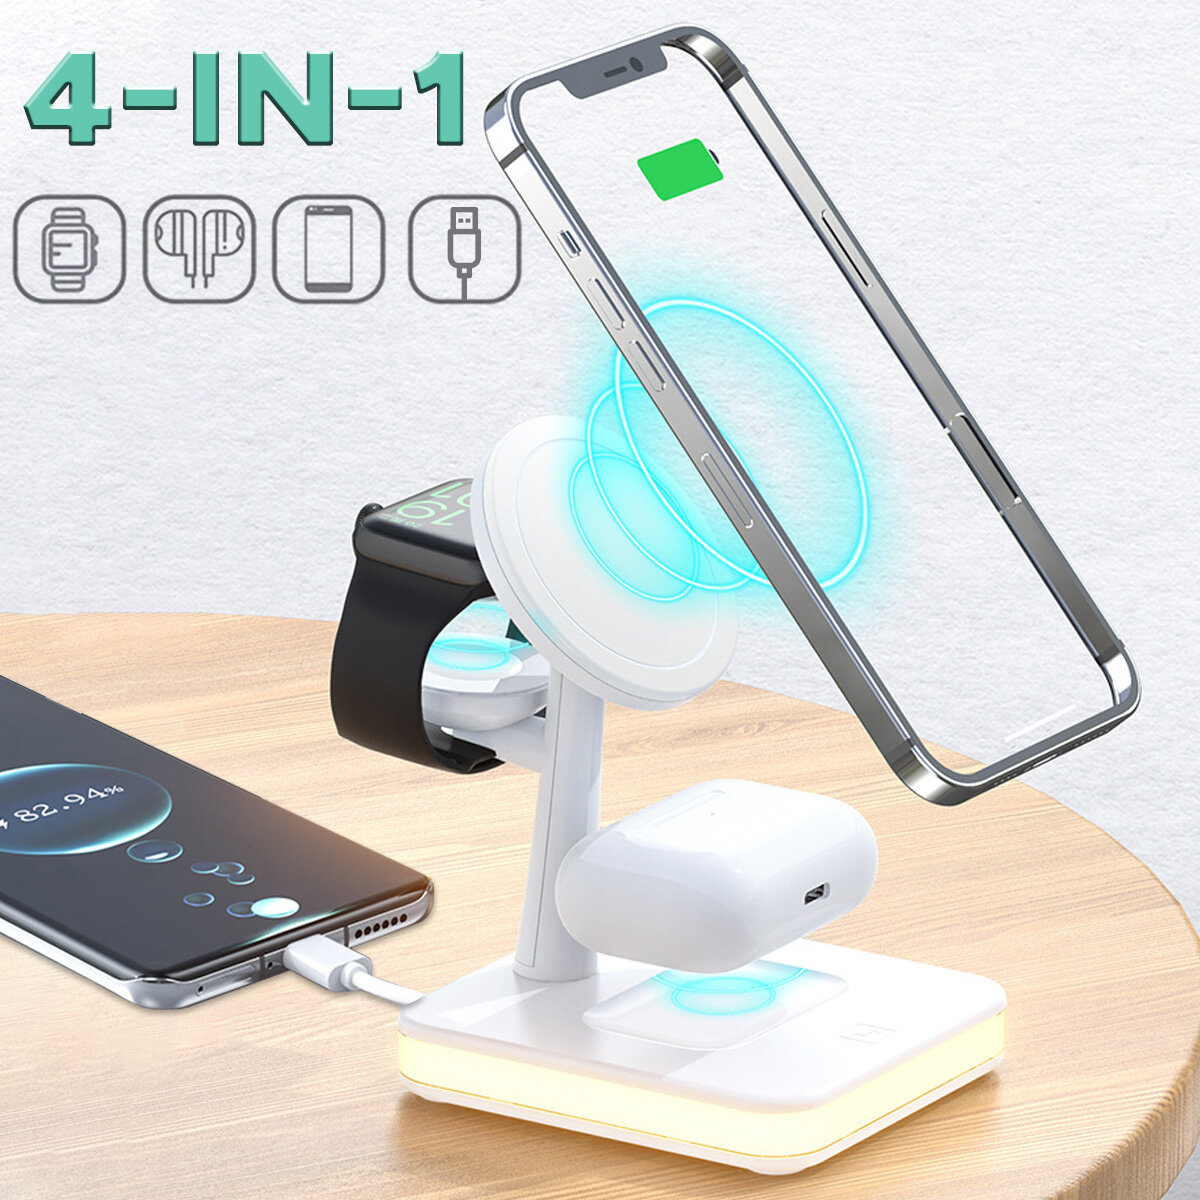 

4-IN-1 Magnetic Wireless Charging Station Dock Charger Night Light for iPhone Airpods iWatch